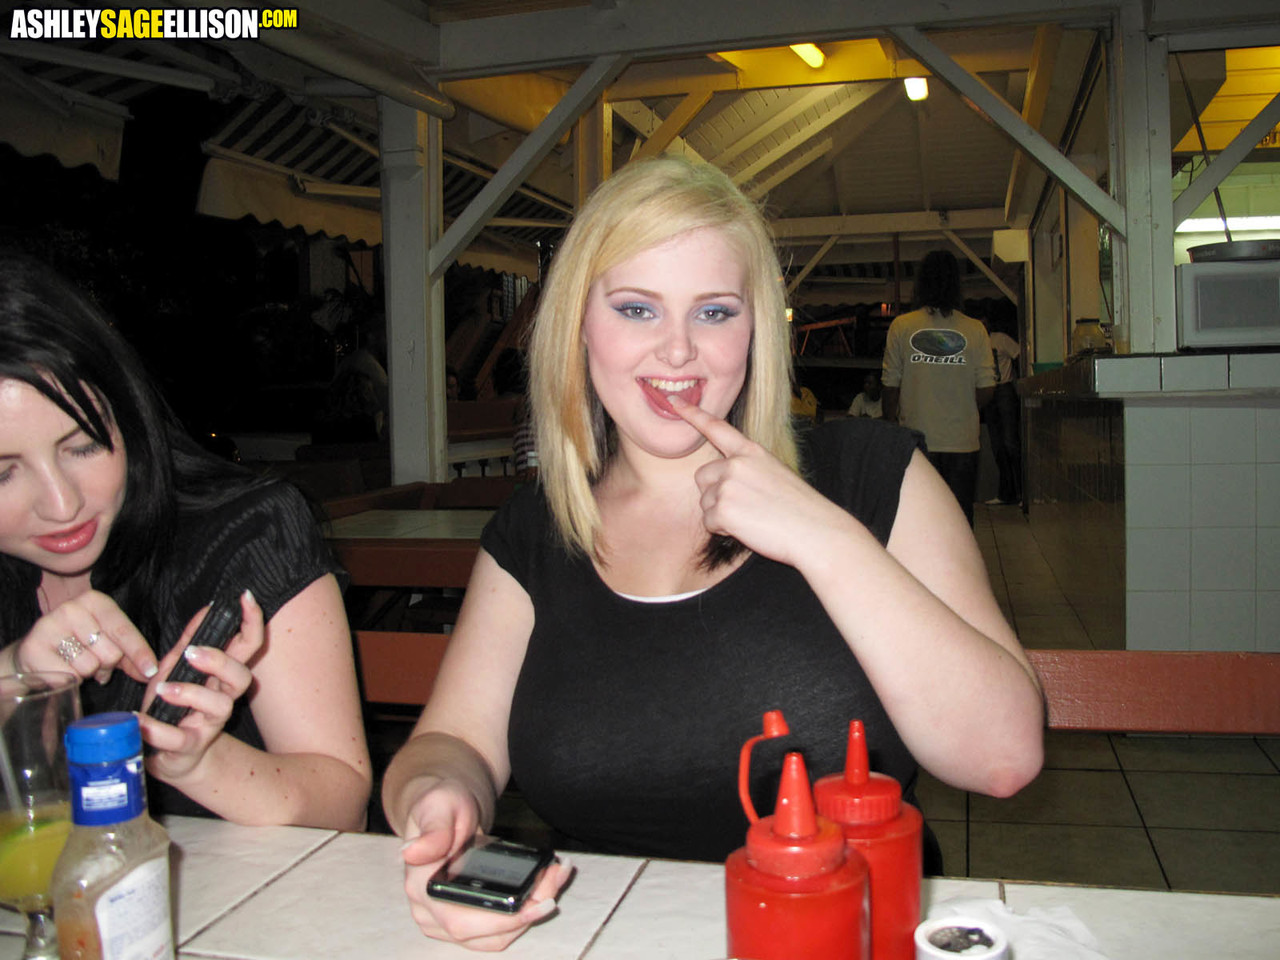 Fat chick Ashley Sage Ellison and her busty gf go out on the town foto porno #426376435